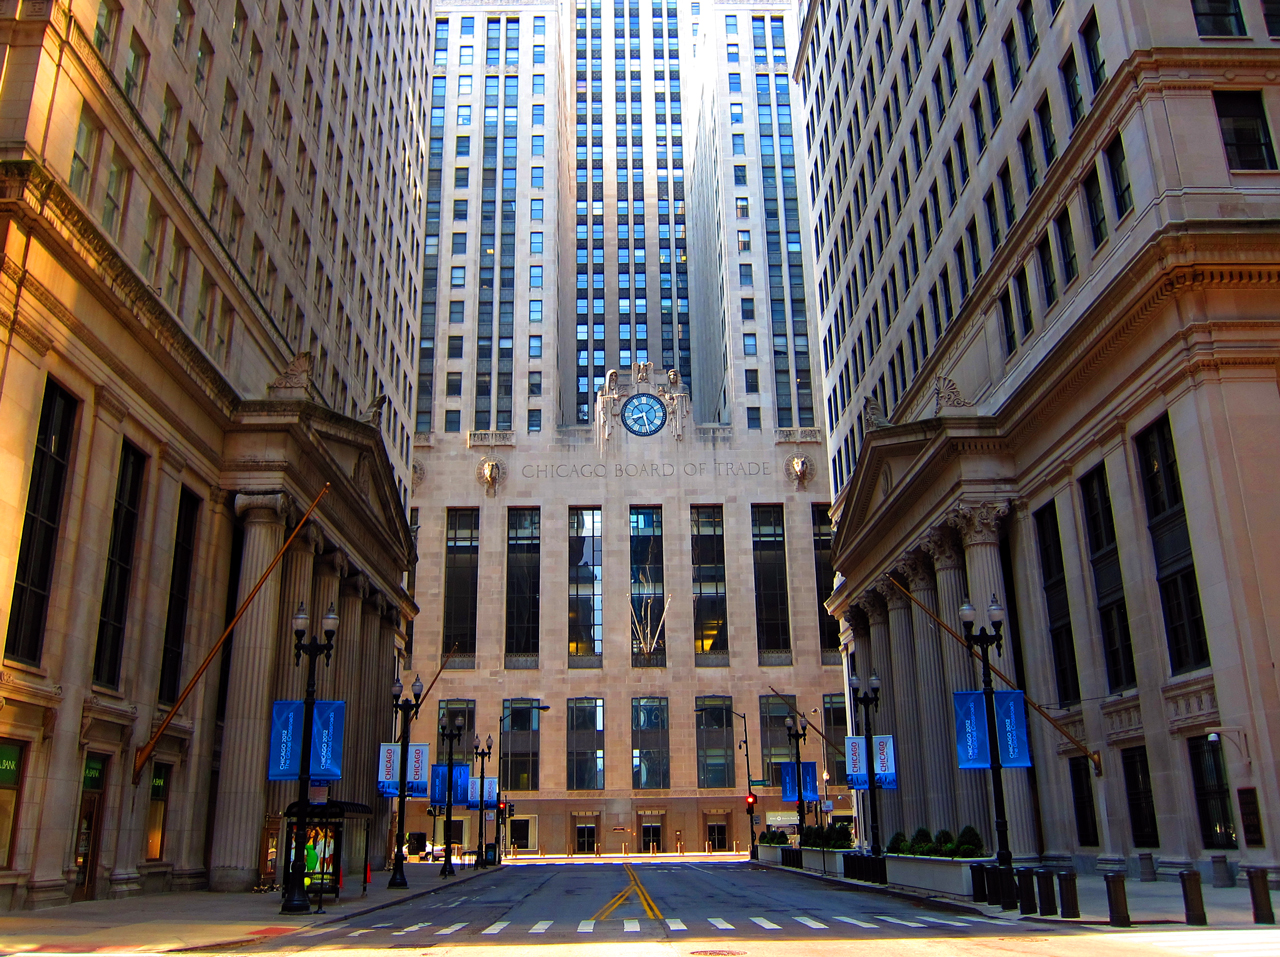 Chicago Board of Trade » Crosswalks to Nowhere